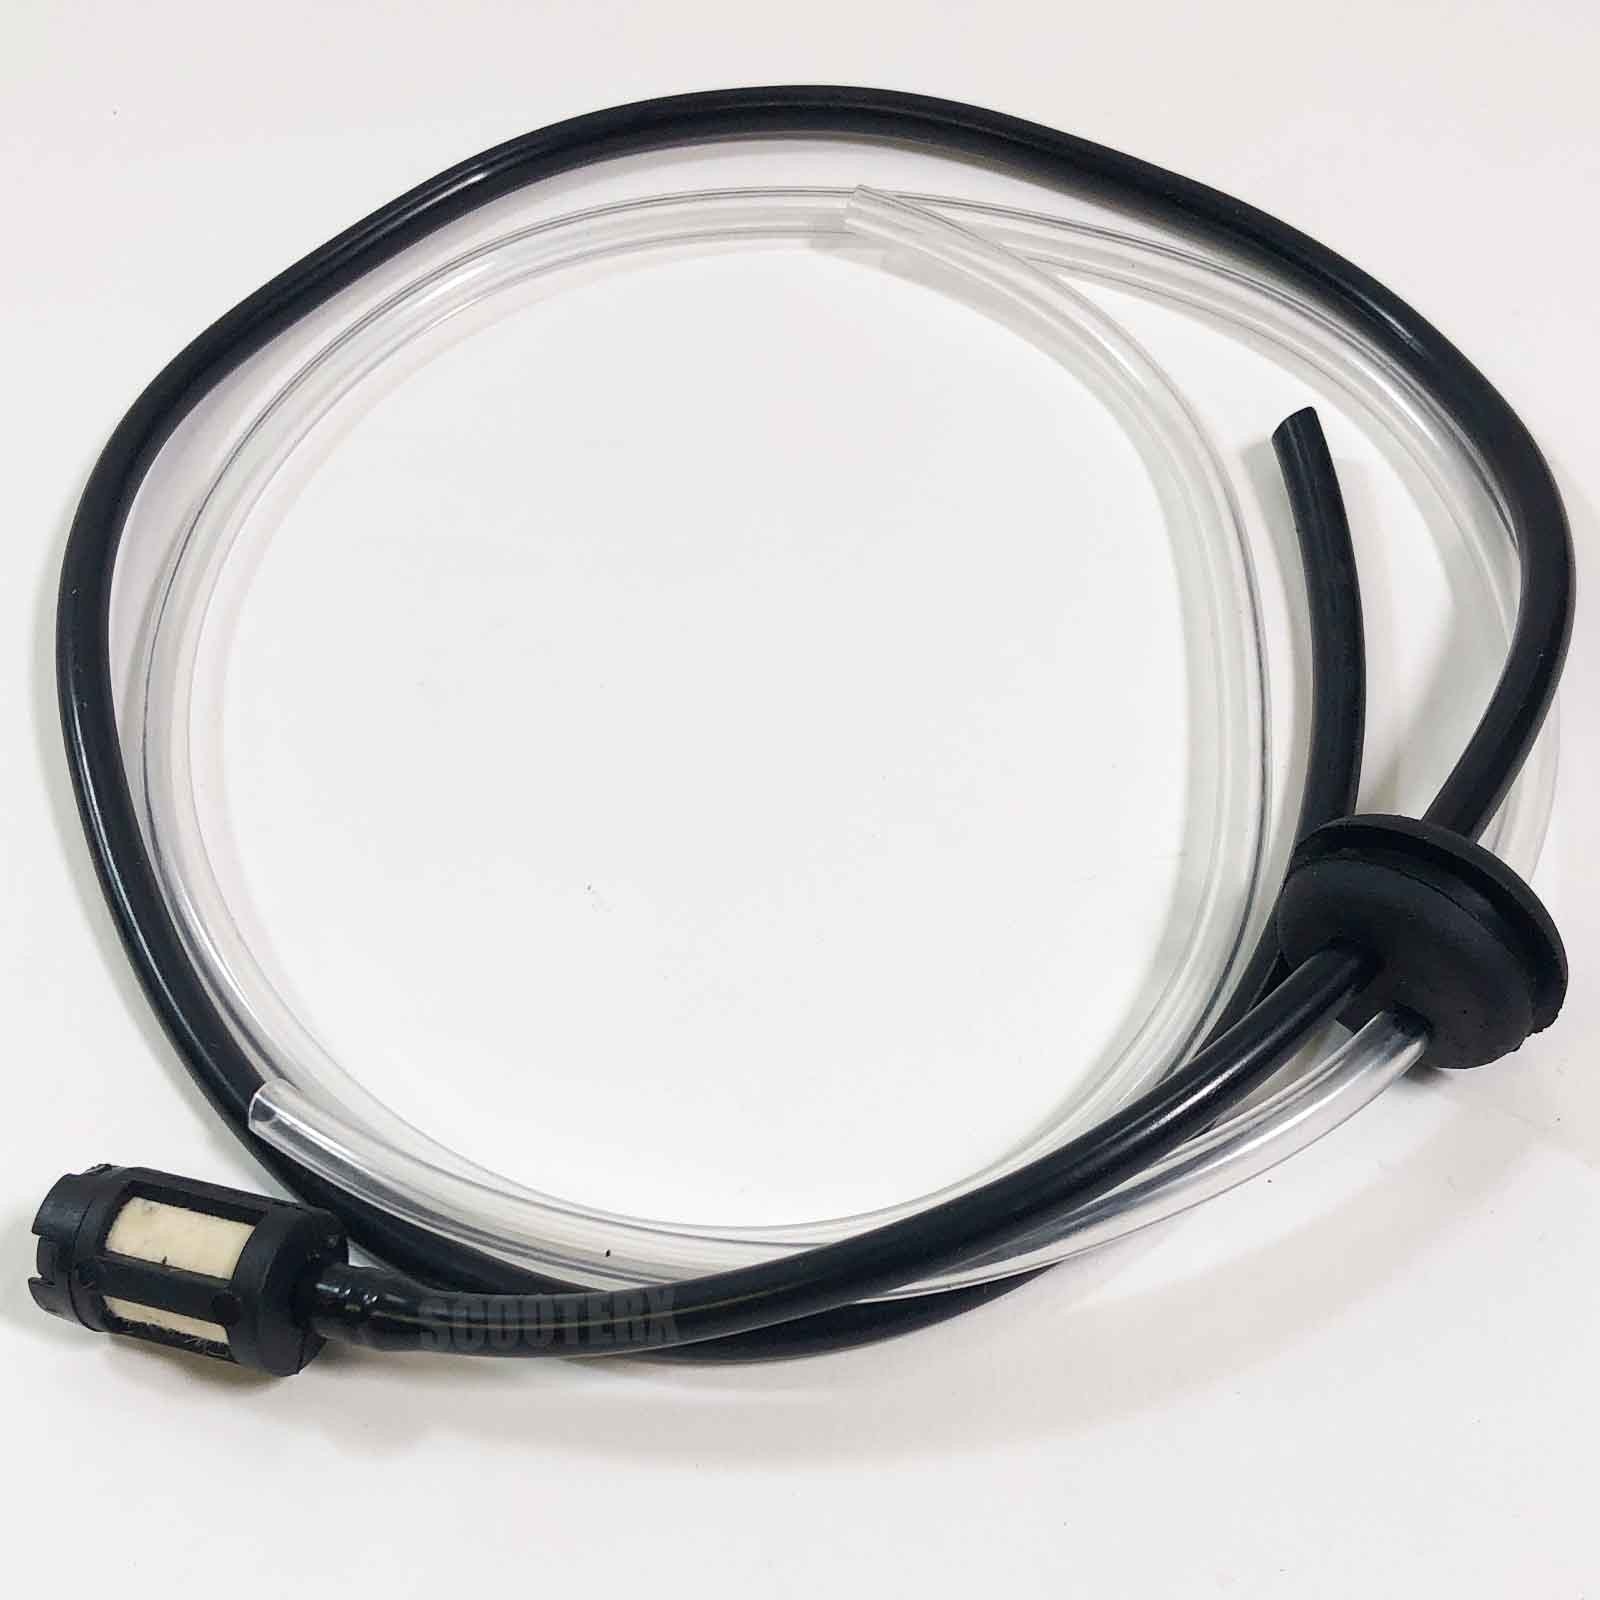 ScooterX FUEL LINES 16" For Dirt Dog Gas Scooter